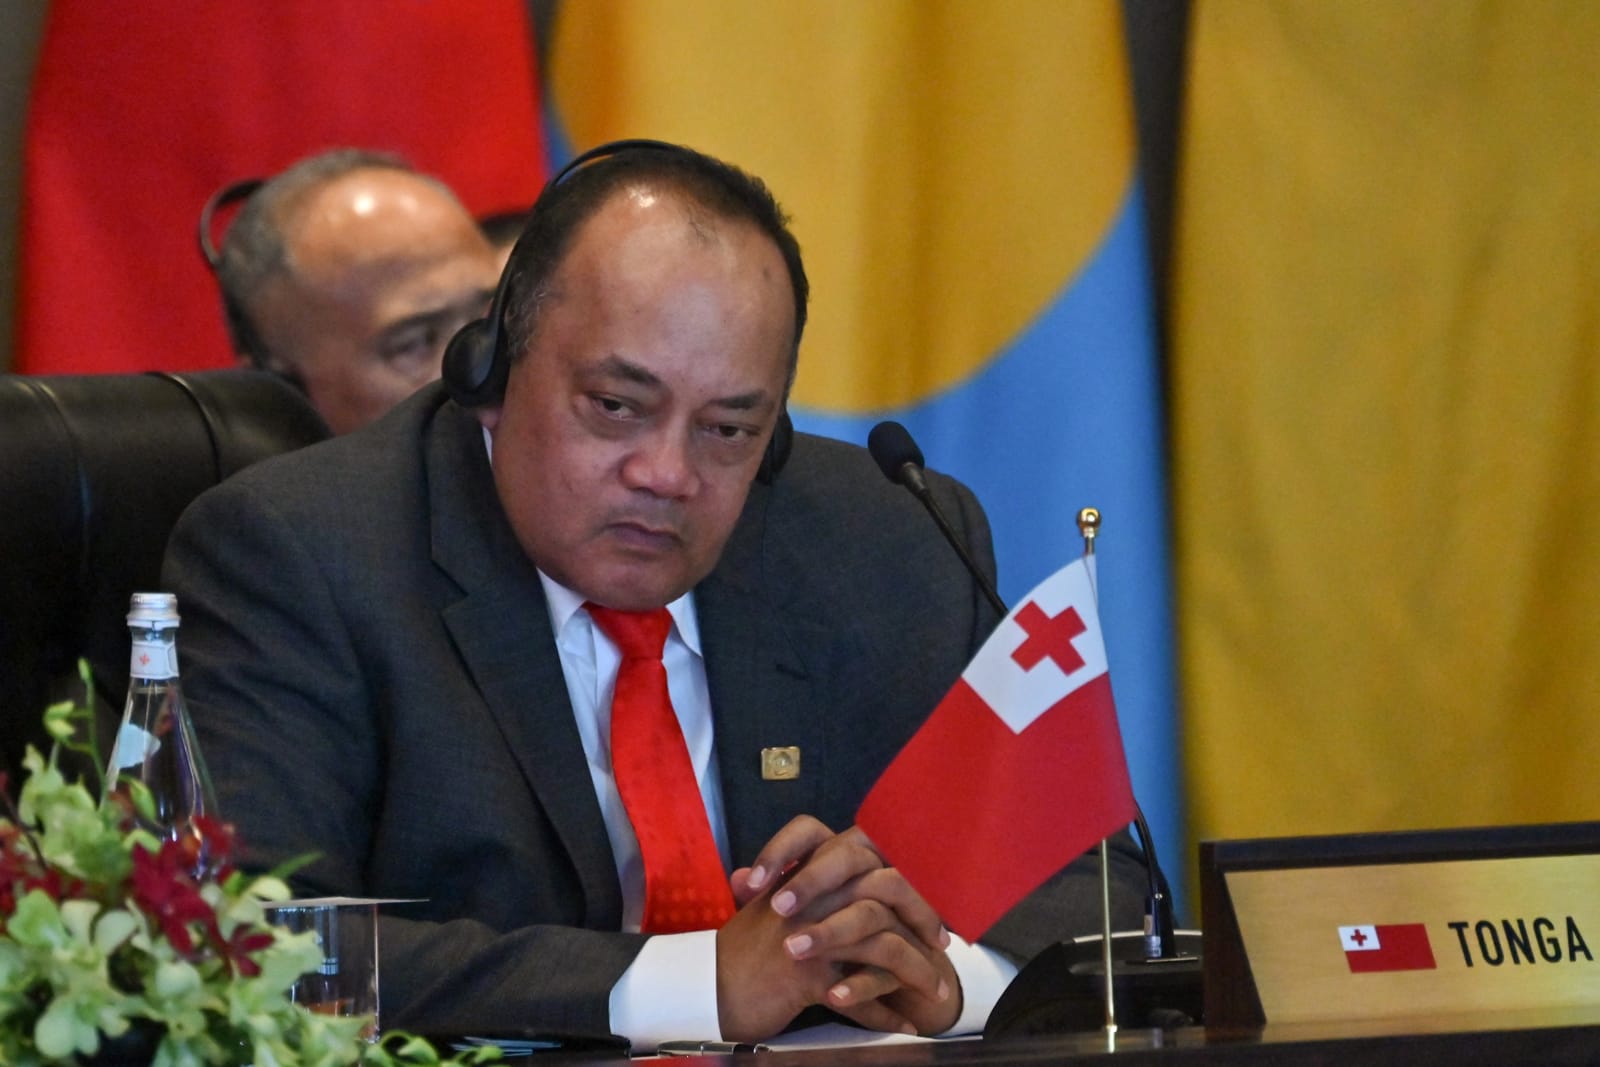 Tonga's Prime Minister Hu'akavameiliku Siaosi Sovoaleni during the Forum for India-Pacific Islands Cooperation in Port Moresby, PNG, 22 May 2023 (Adek Berry/AFP via Getty Images)